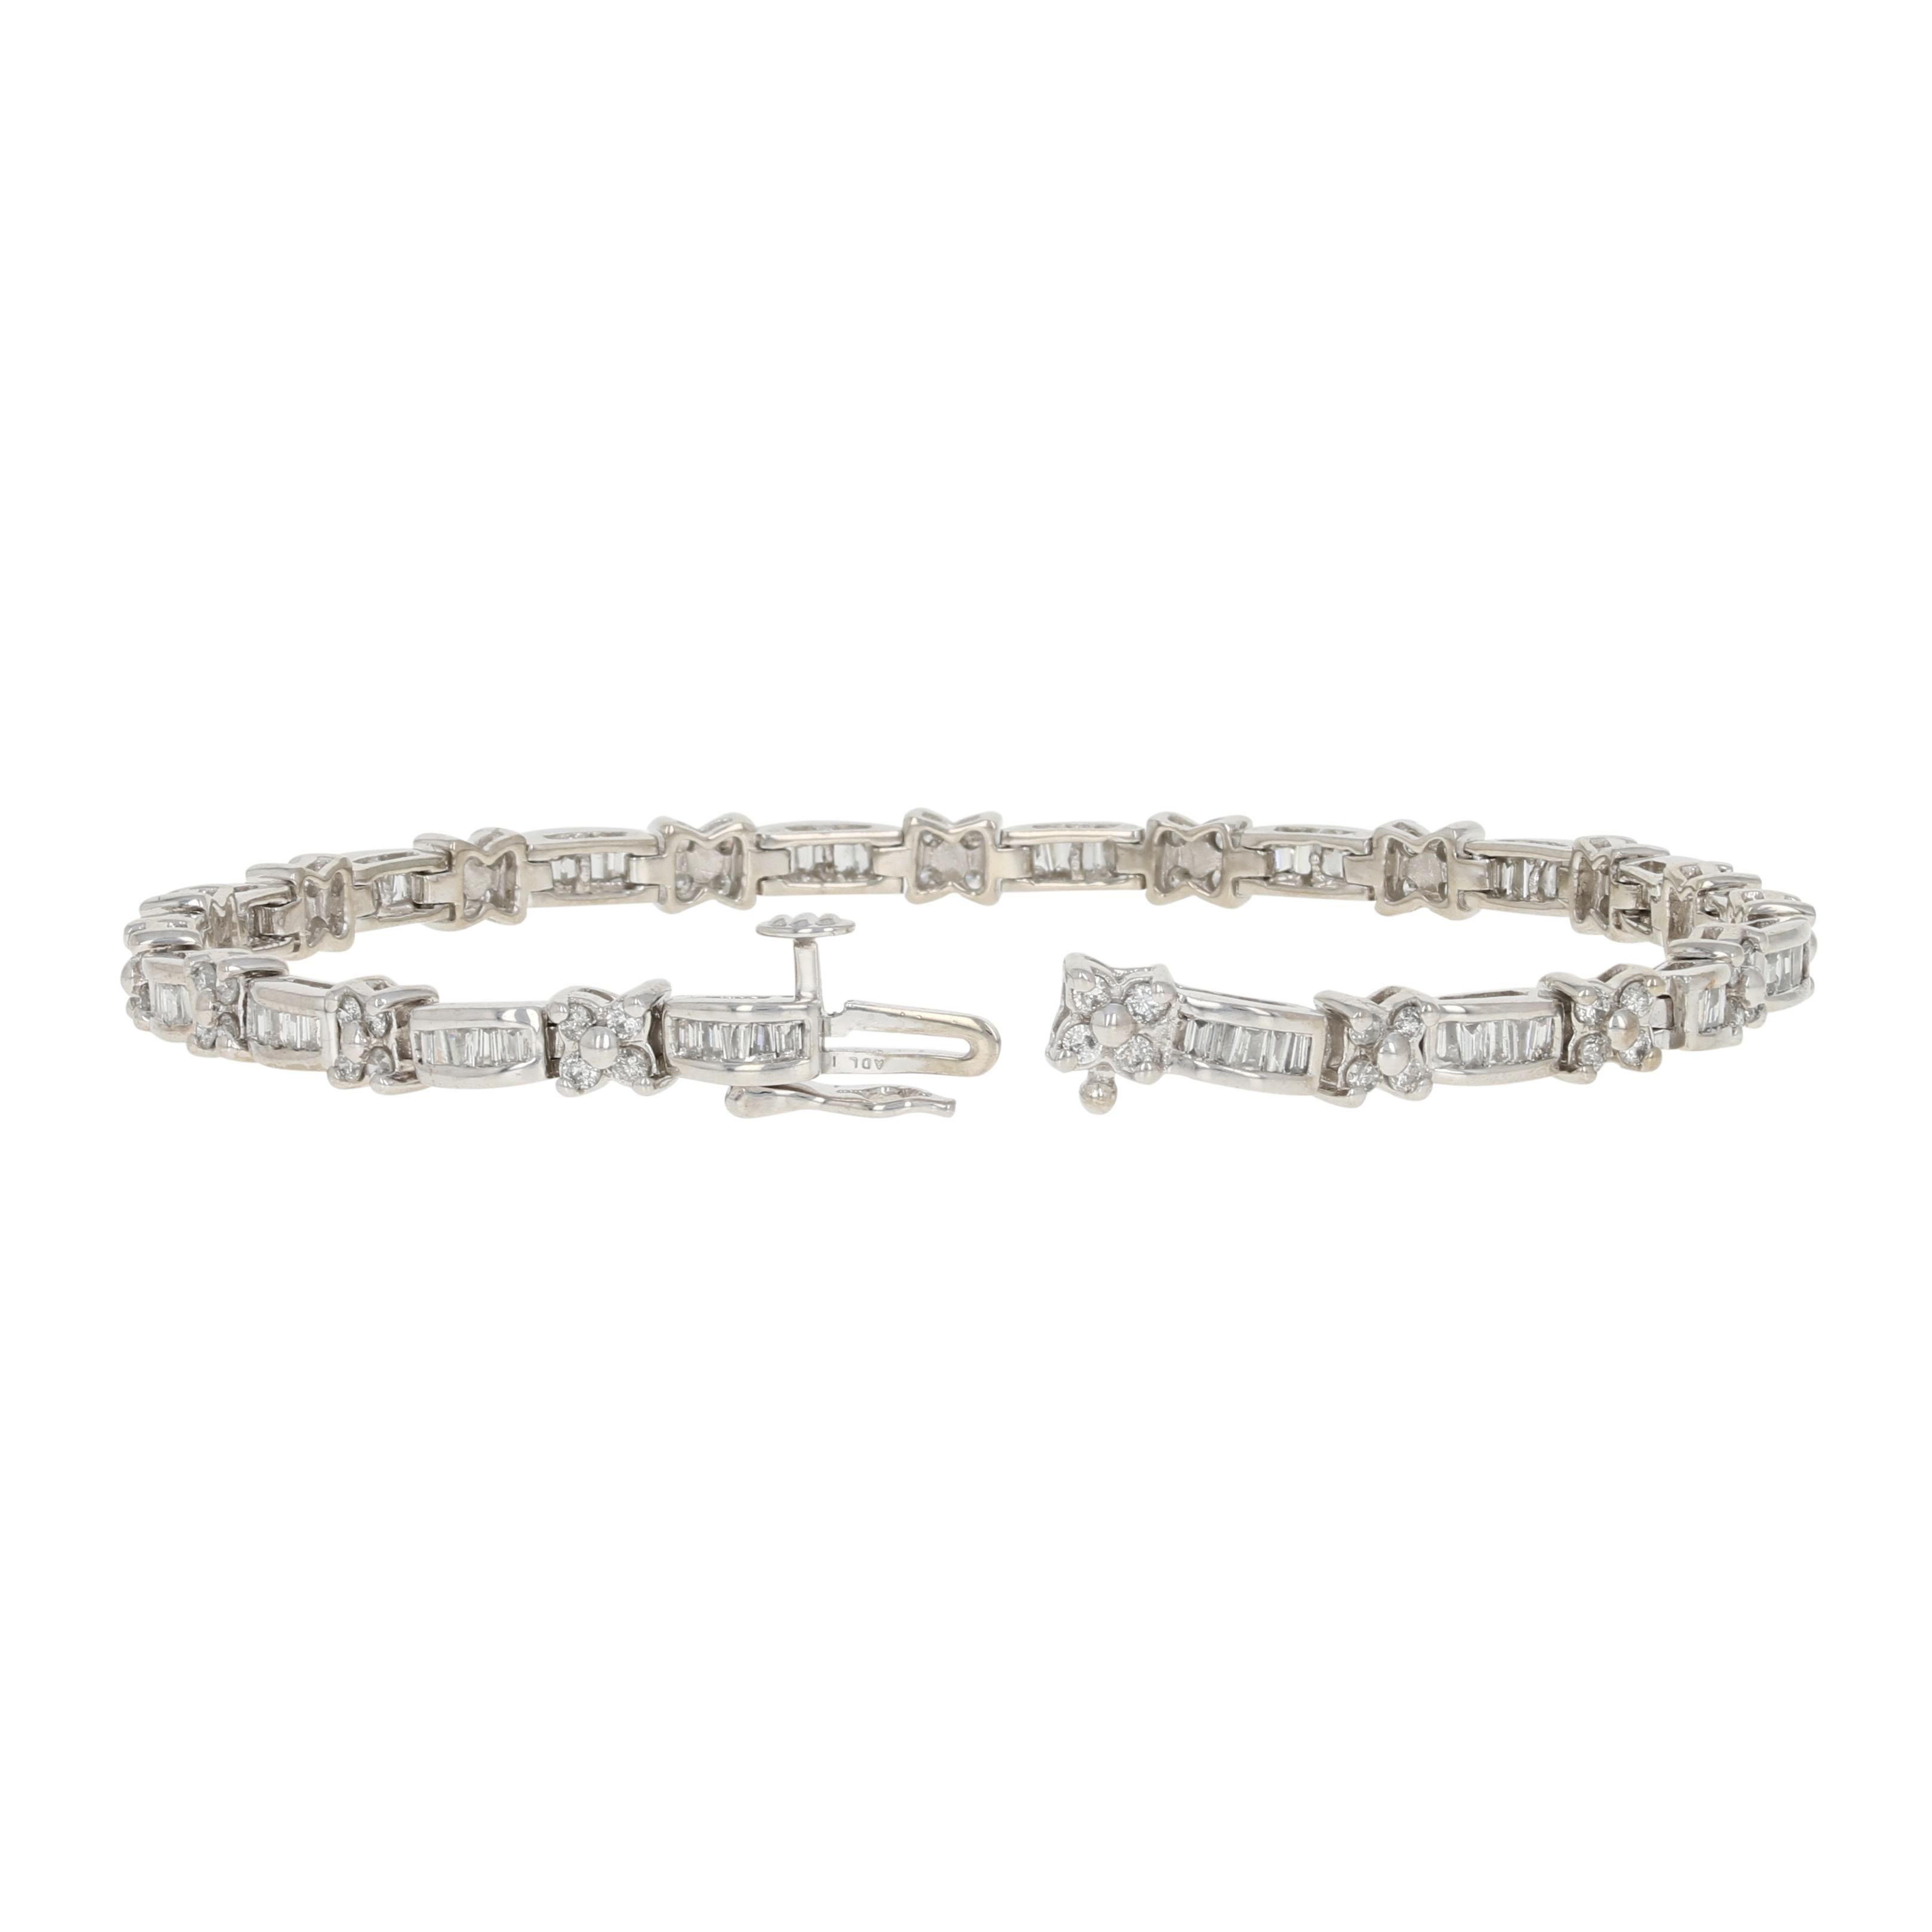 Radiantly beautiful, this piece will be a stunning addition to your jewelry collection! This 14k white gold link bracelet showcases a floral-inspired motif adorned with natural diamonds that are held in ported mounts for optimum shine.   

Metal